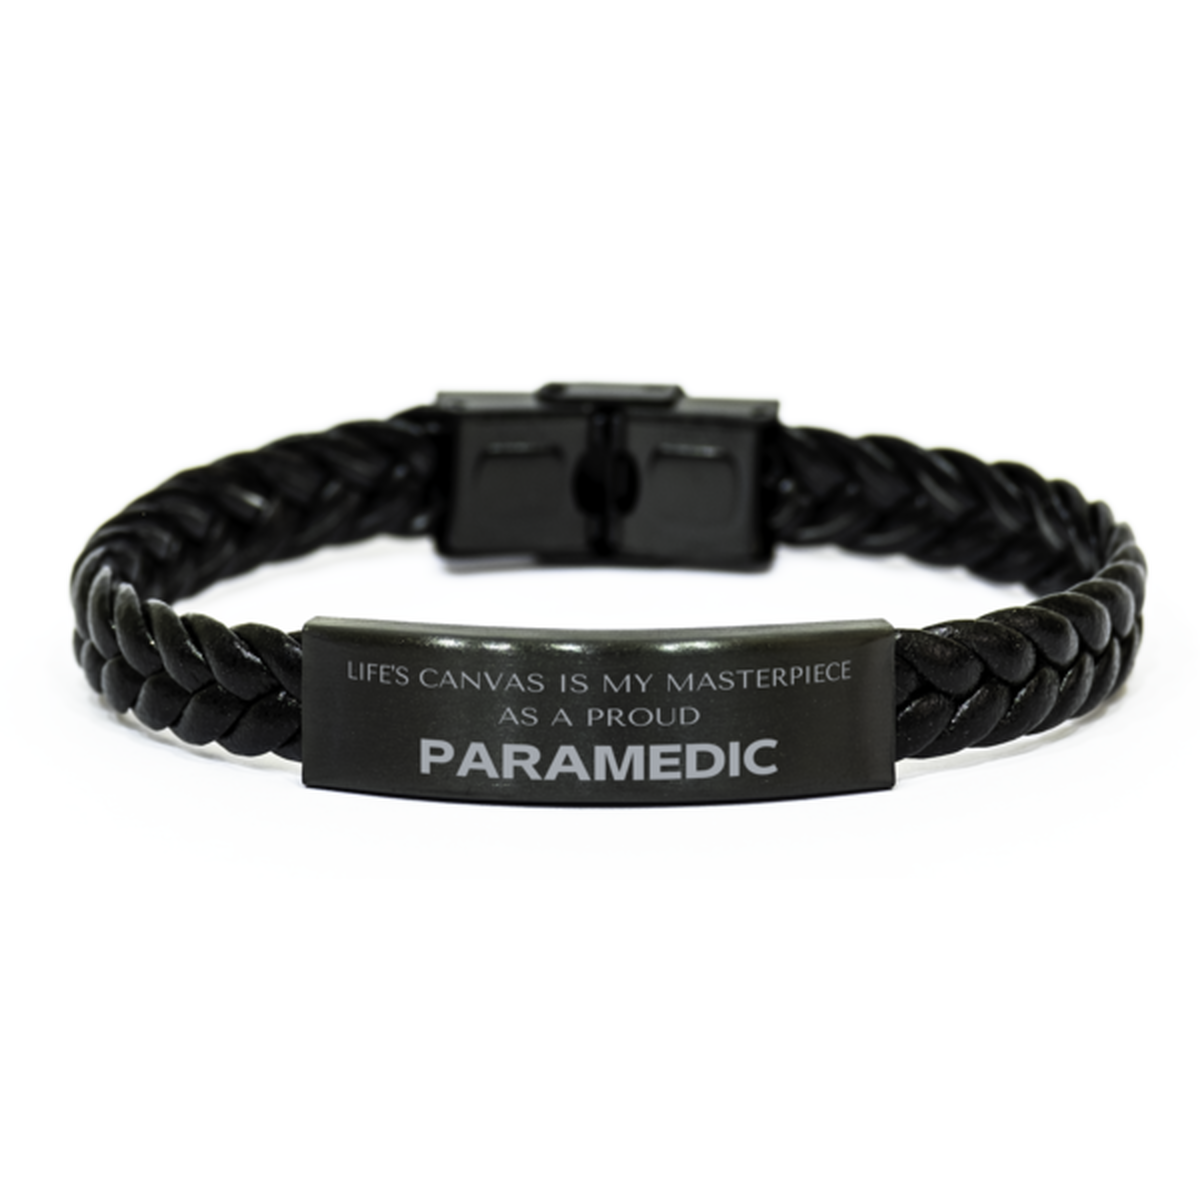 Proud Paramedic Gifts, Life's canvas is my masterpiece, Epic Birthday Christmas Unique Braided Leather Bracelet For Paramedic, Coworkers, Men, Women, Friends